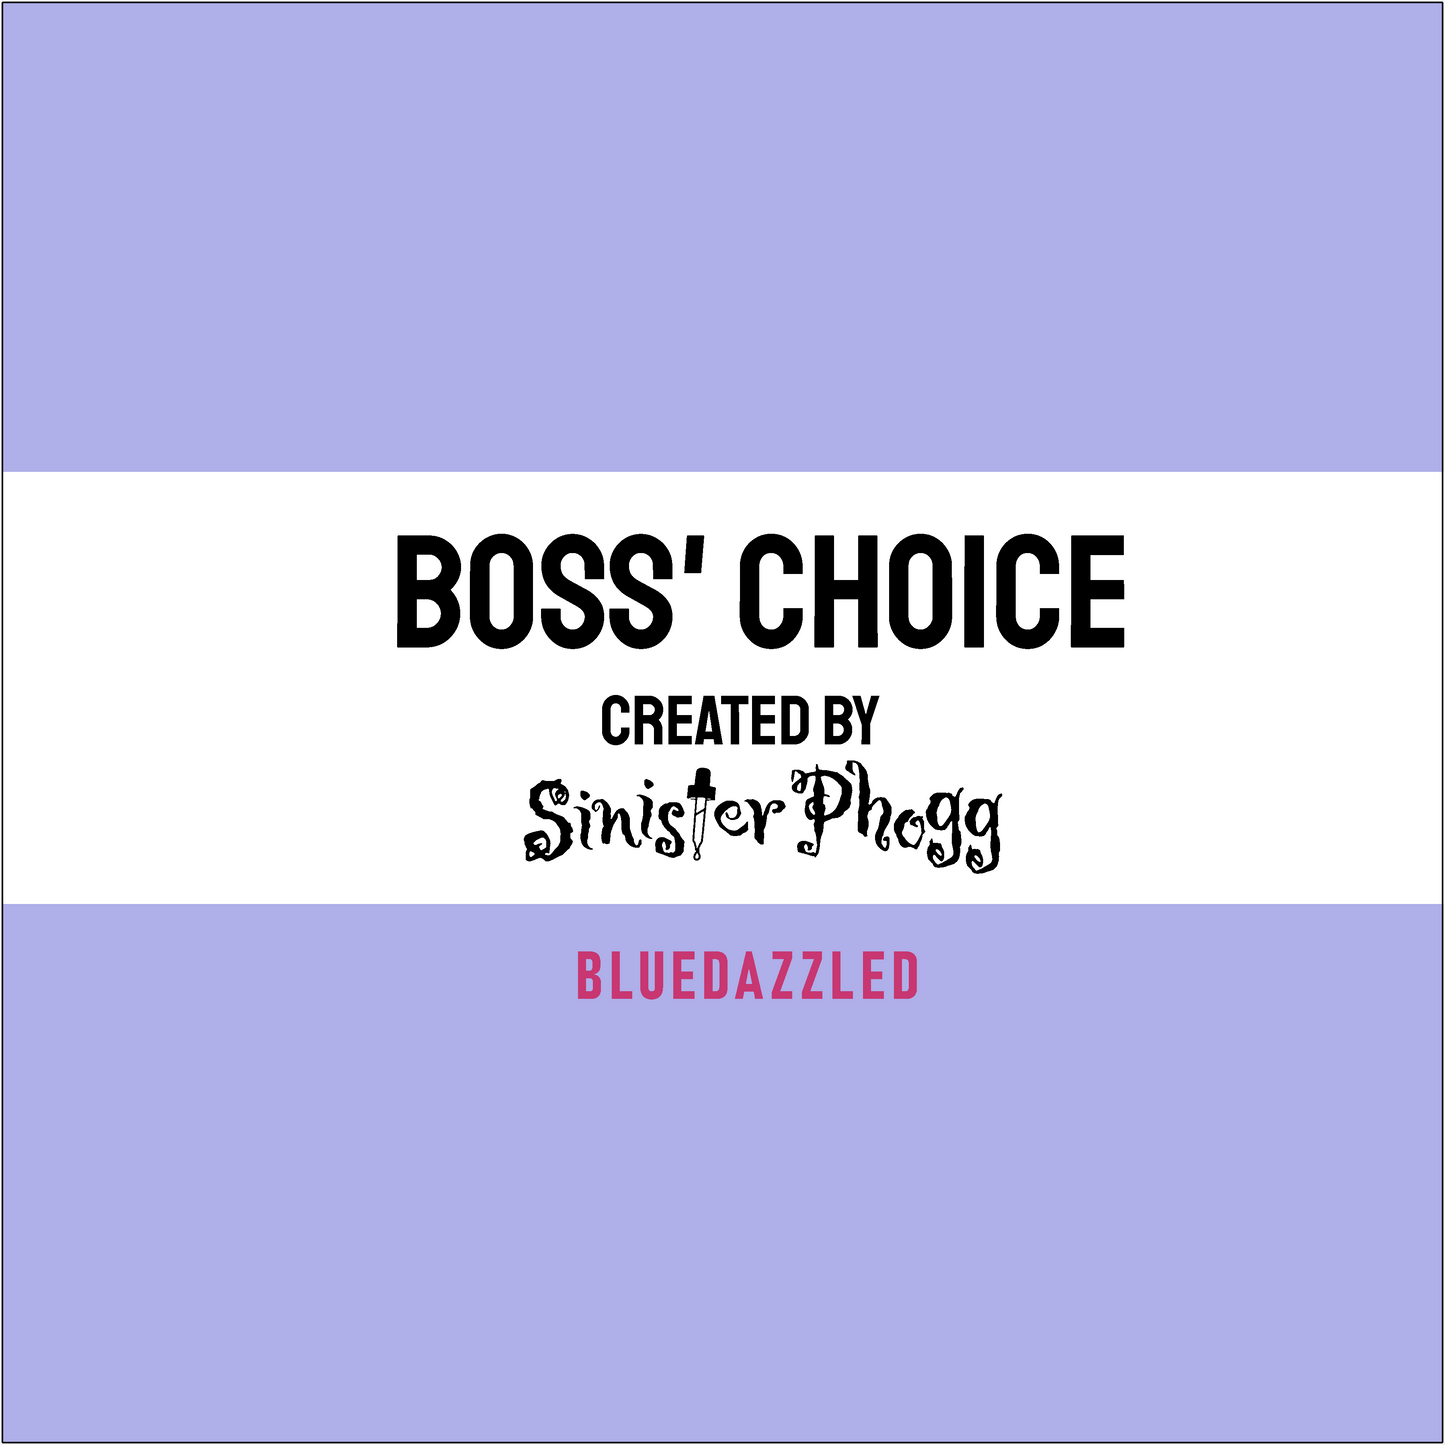 Bluedazzled - Boss' Choice by Sinister Phogg